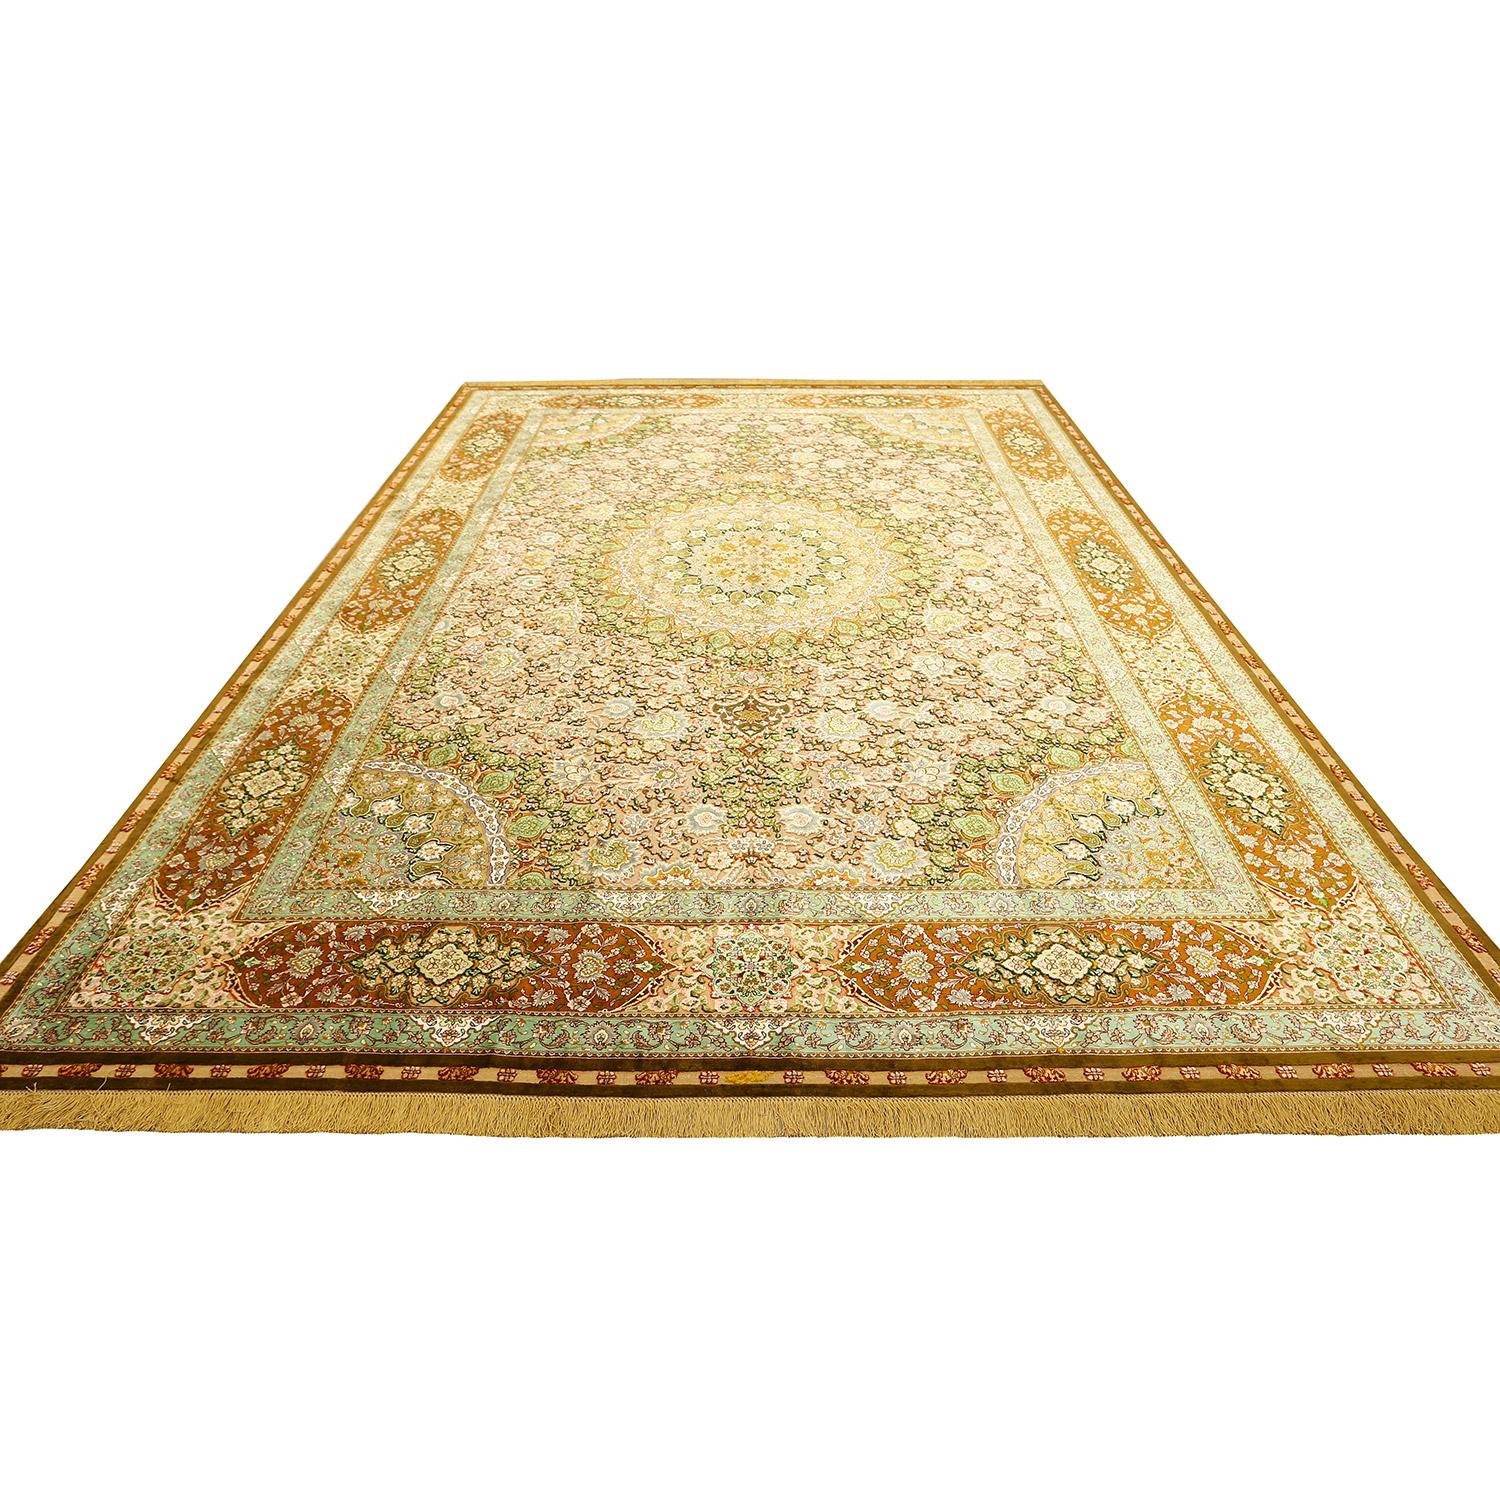 Elevate your living space with this super fine Tabriz Souf with a center medallion design. A Tabriz rug is a masterpiece of craftsmanship and artistry that hails from the historic city of Tabriz, nestled in the heart of Iran. Renowned for its